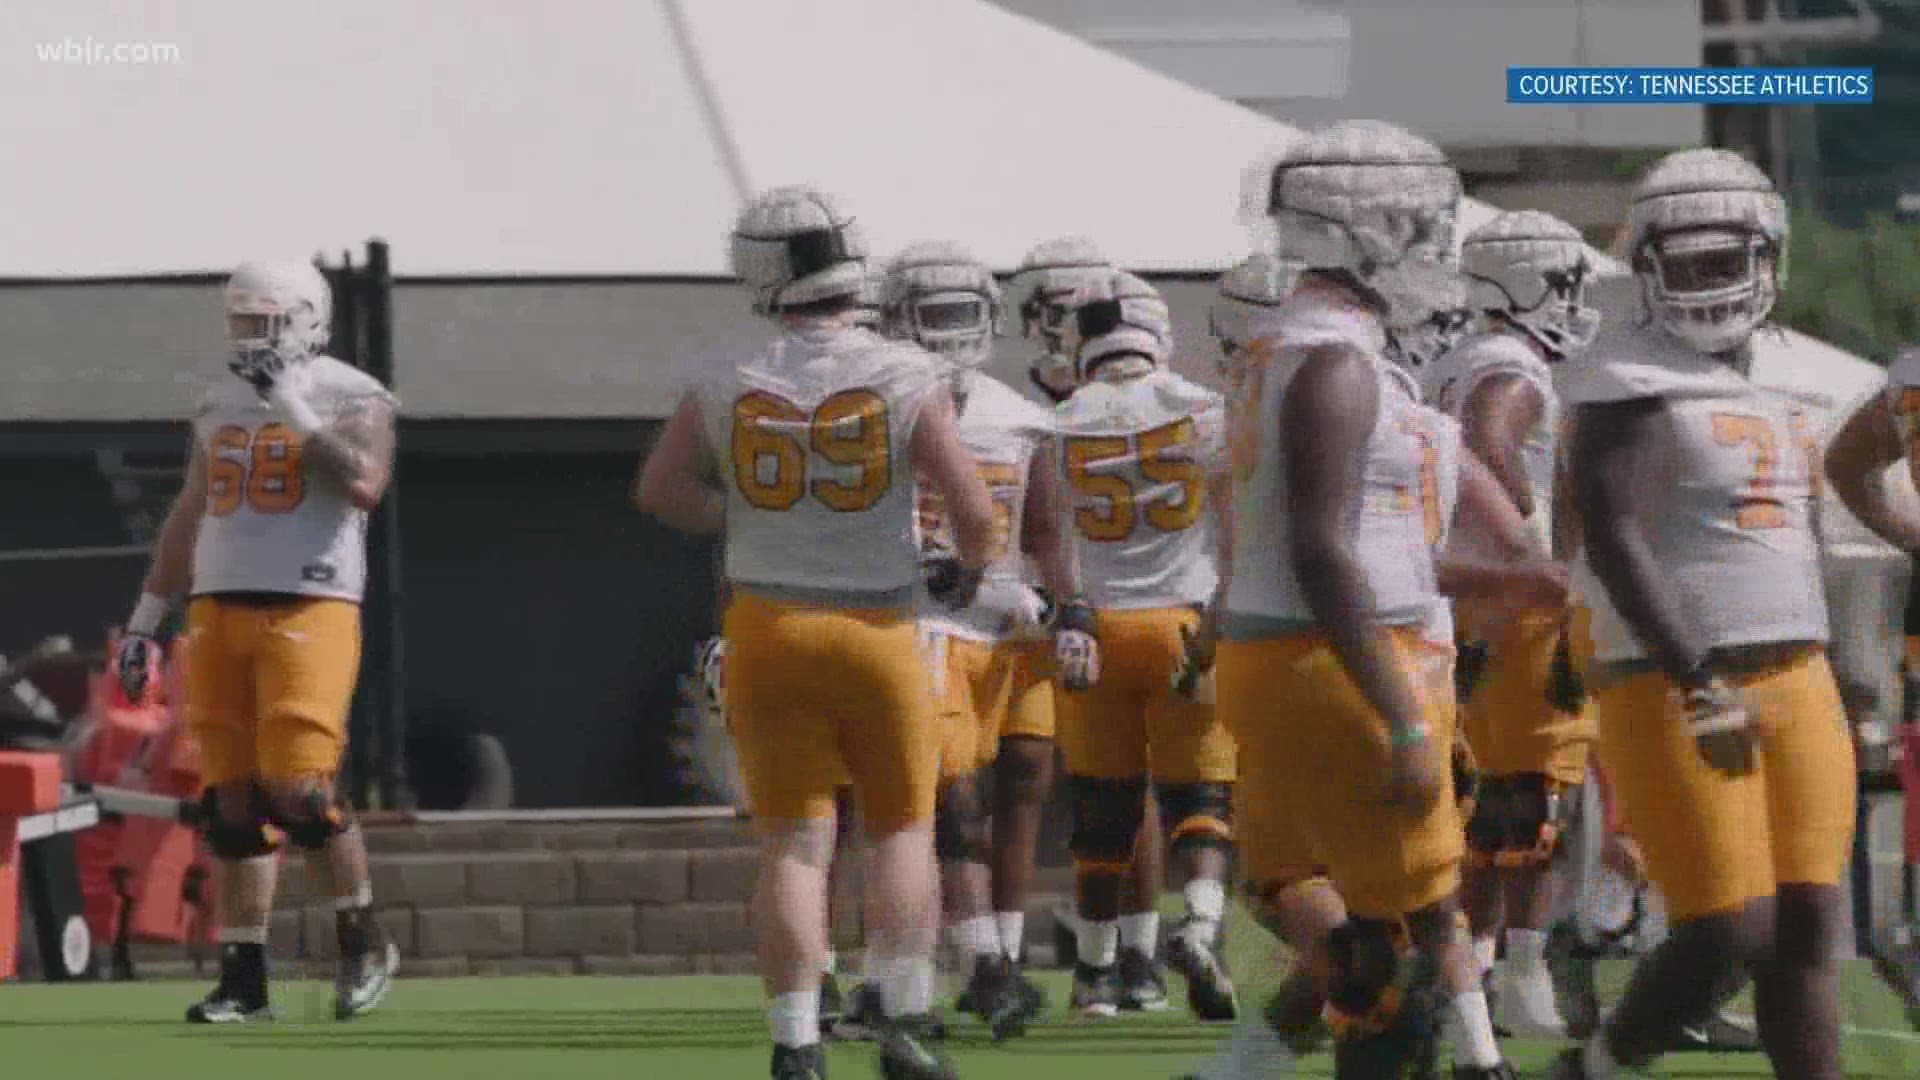 The Vols had to cancel a scrimmage Saturday because too few players were able to play.